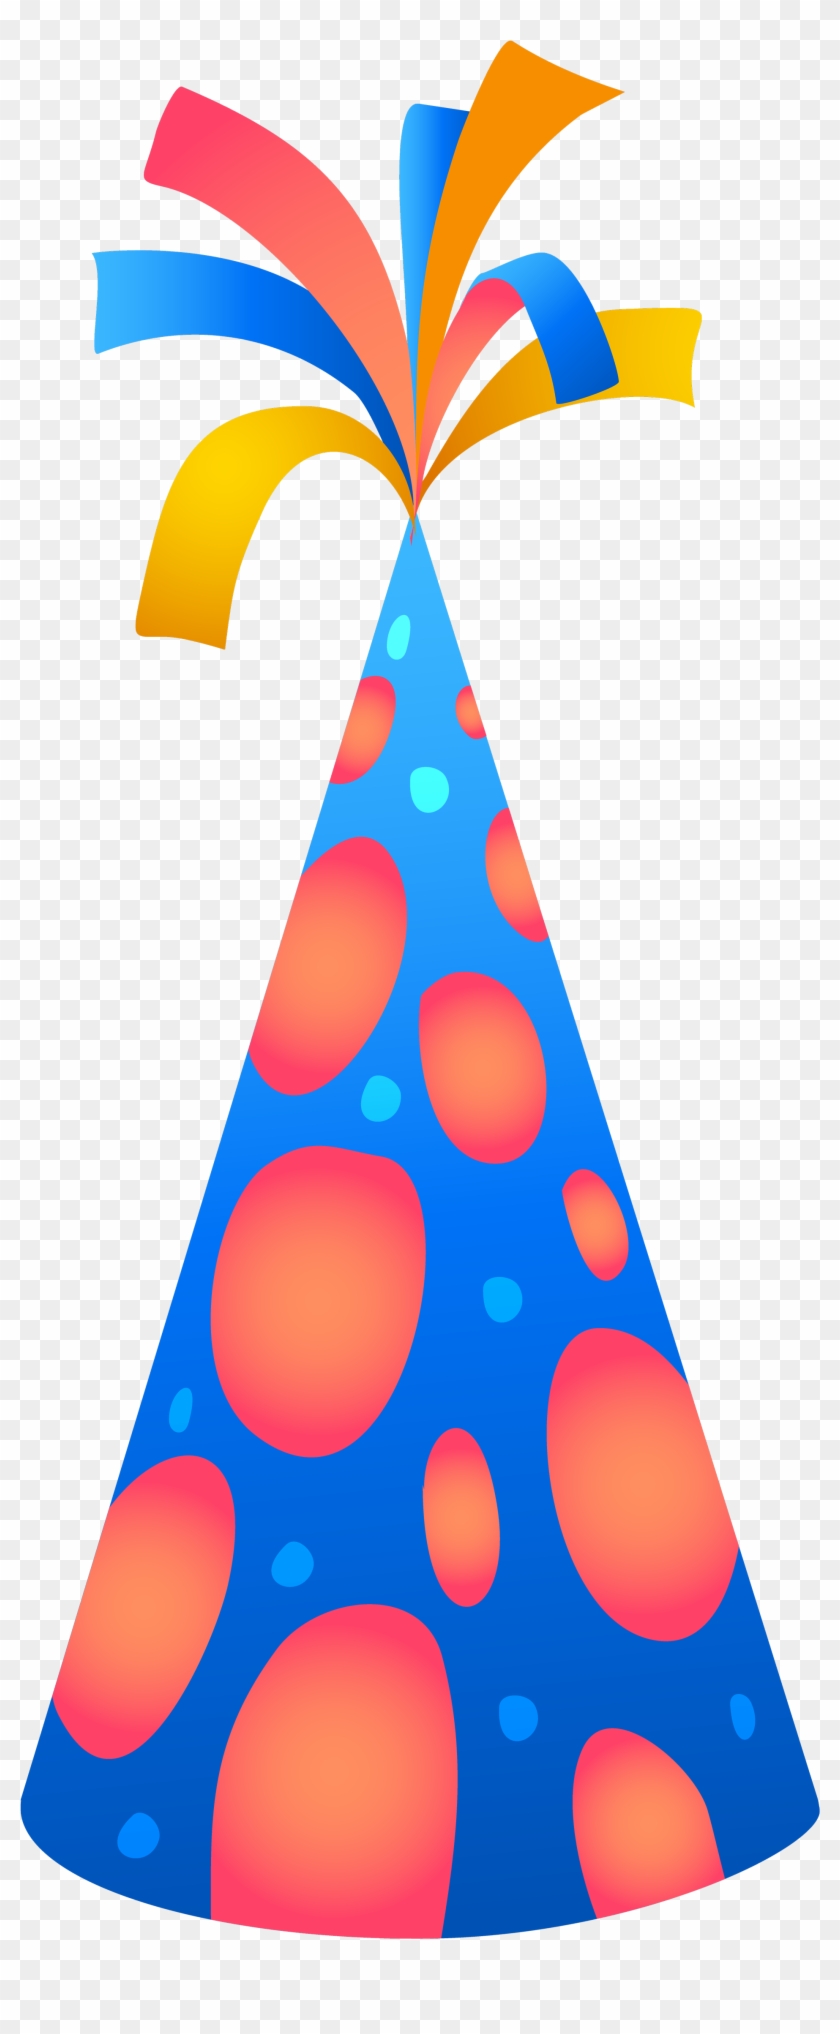 Party Hat Png Image - Party Hat Image Png Clipart #563758